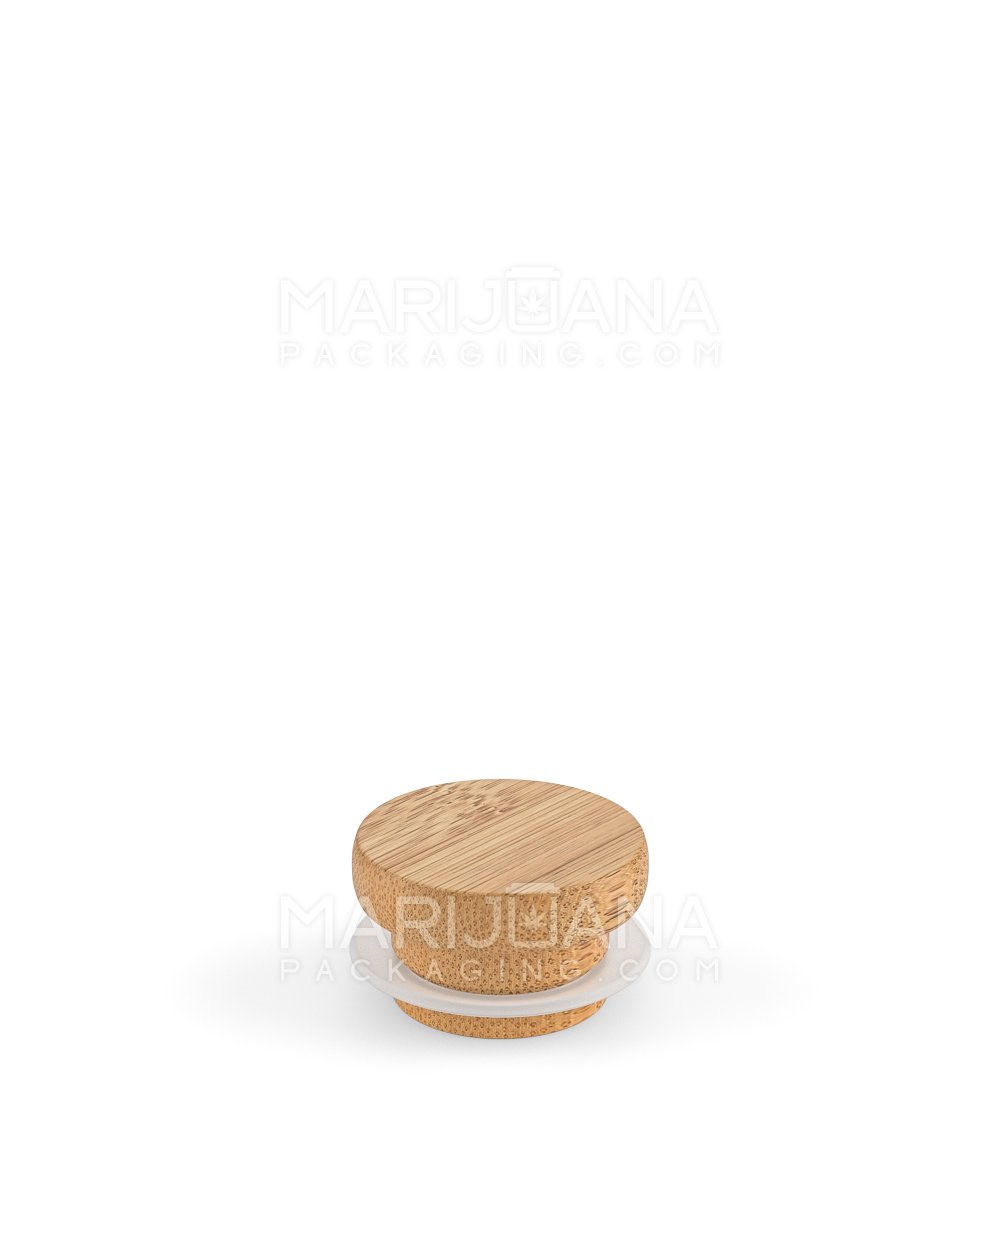 Glass Jar with Wooden Lid | 1oz - 8 Dram - 200 Count - 10